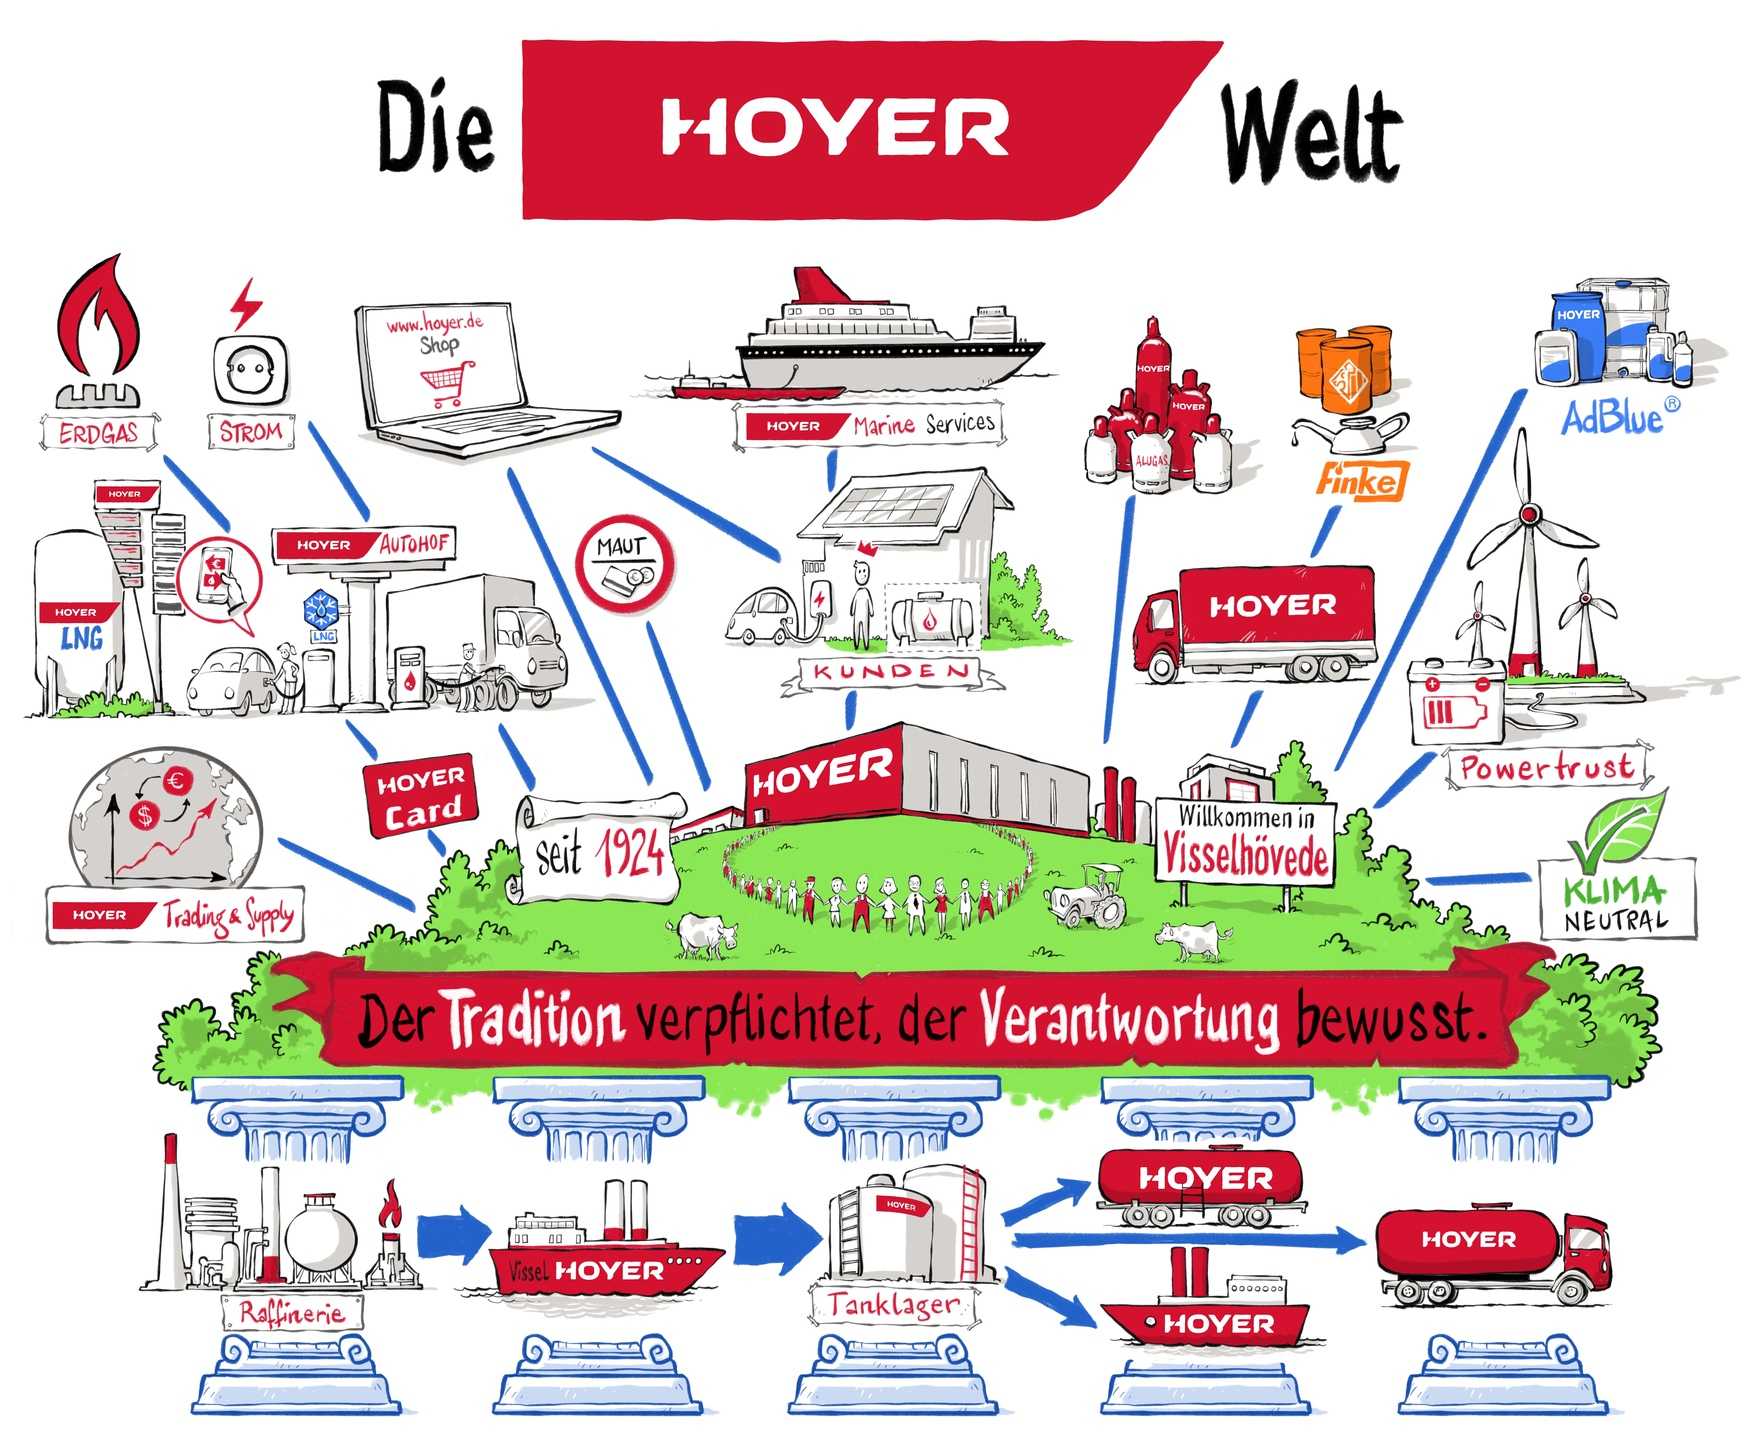 The Hoyer world ▷ Tradition and responsibility